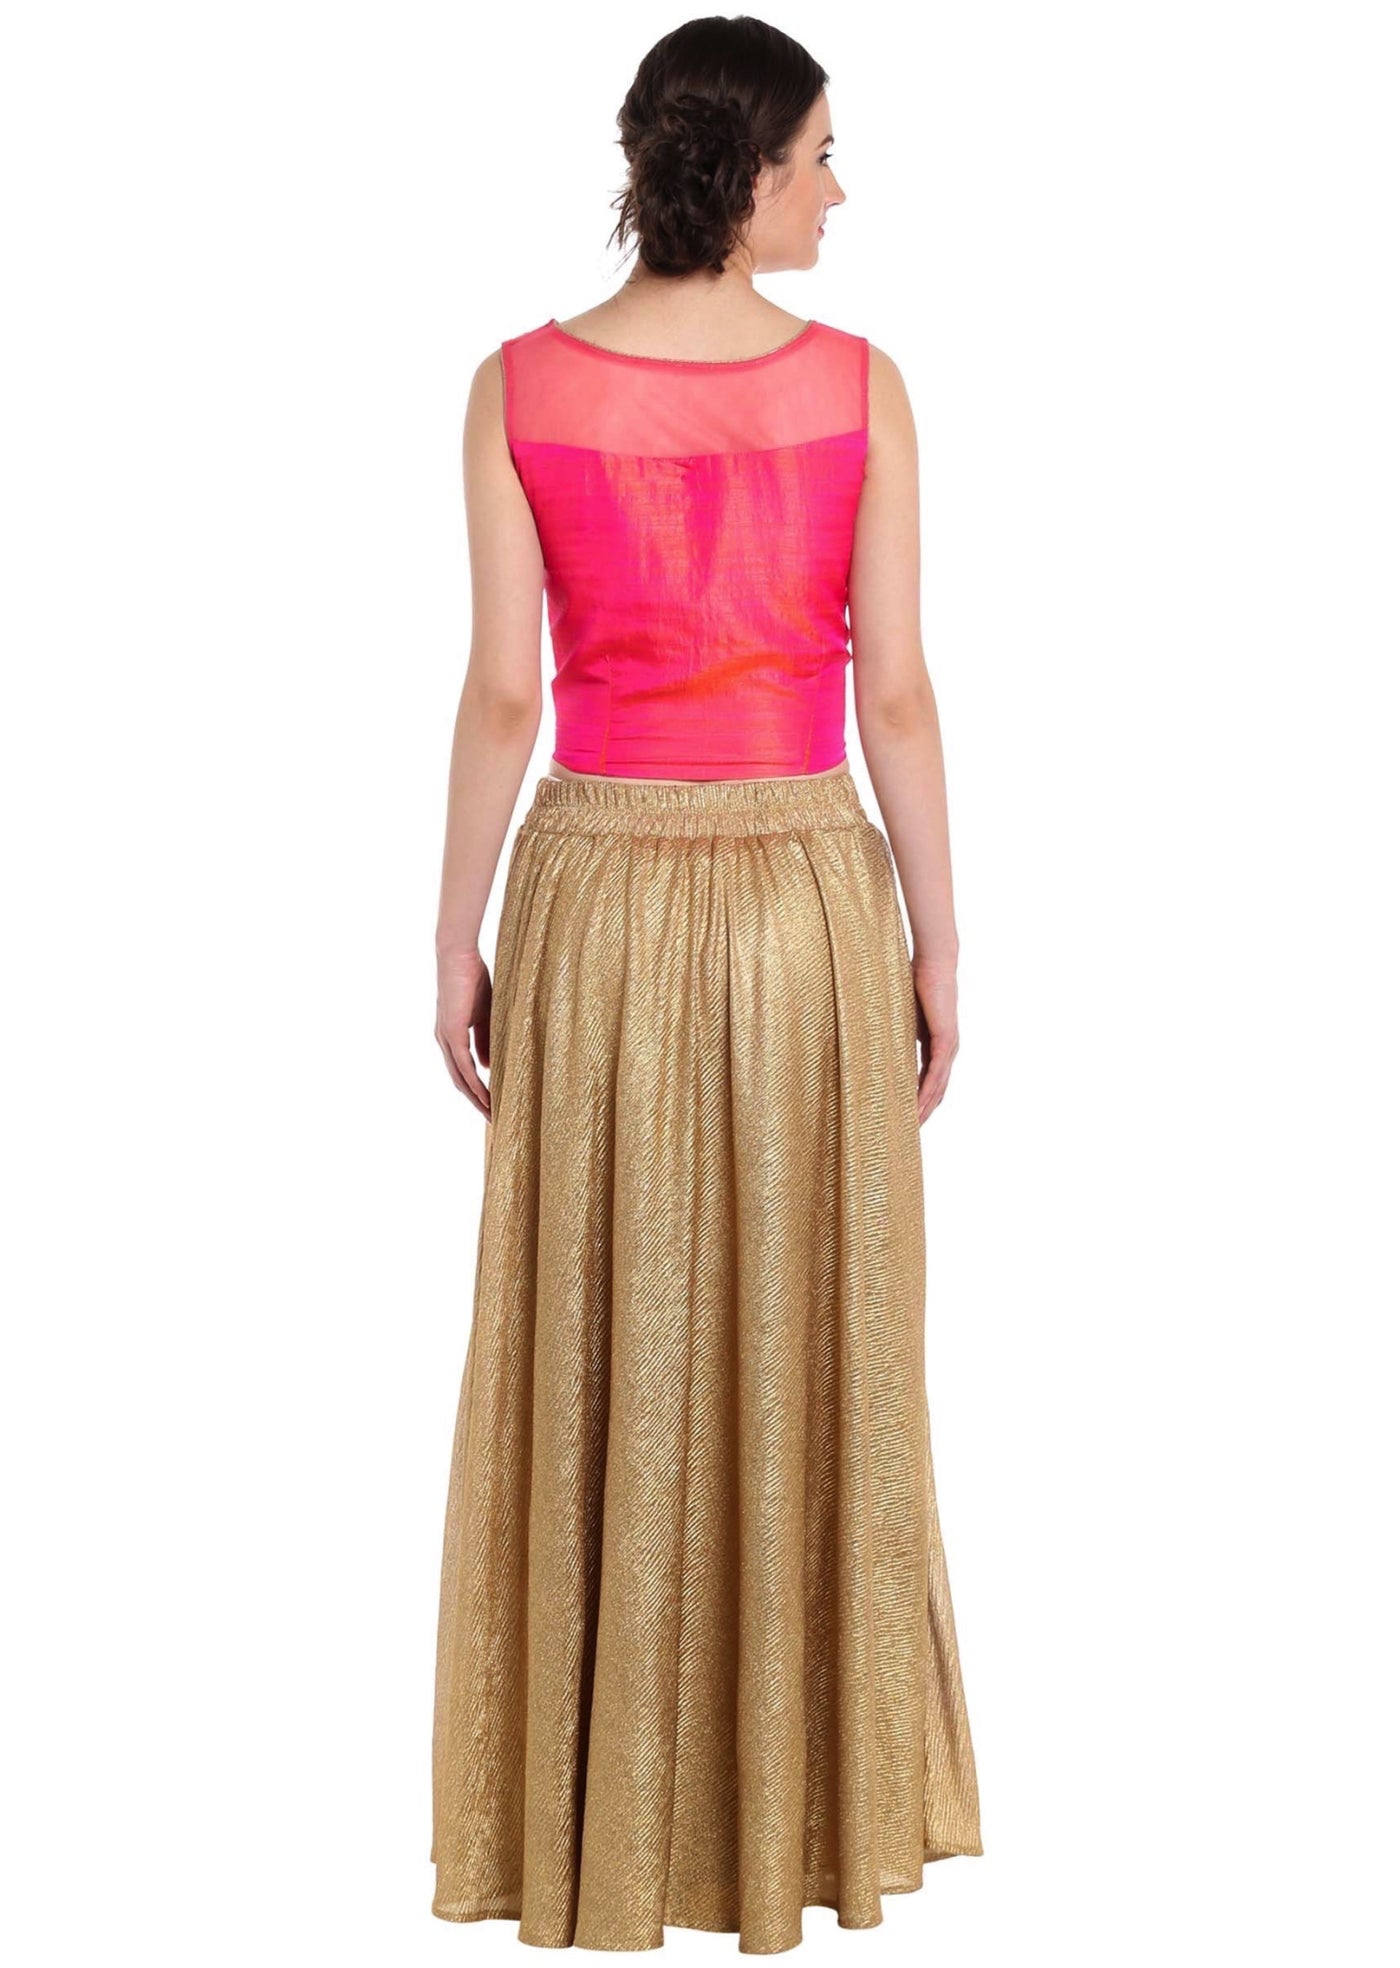 Rani pink crop top blouse in rani pink with gold shimmer skirt Indian Clothing in Denver, CO, Aurora, CO, Boulder, CO, Fort Collins, CO, Colorado Springs, CO, Parker, CO, Highlands Ranch, CO, Cherry Creek, CO, Centennial, CO, and Longmont, CO. NATIONWIDE SHIPPING USA- India Fashion X